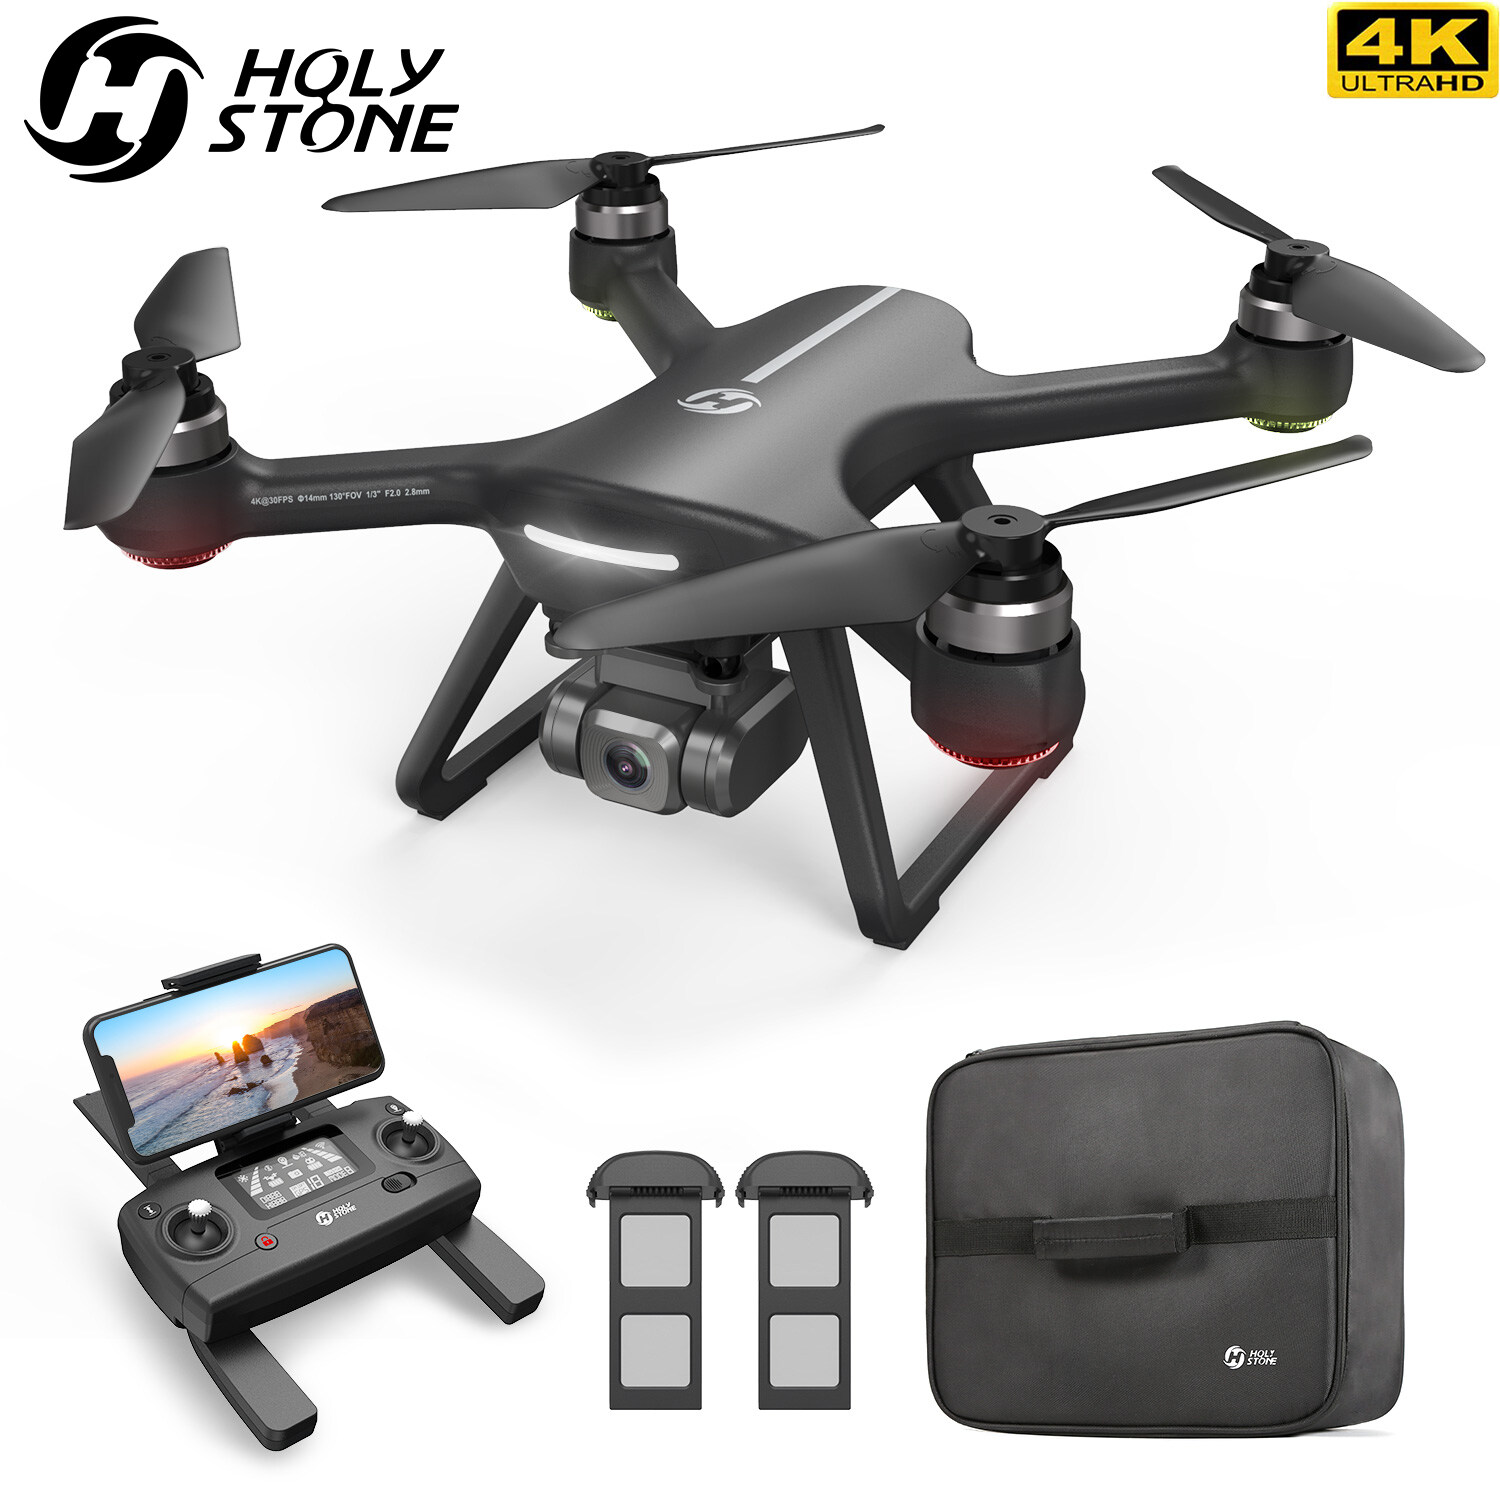 GPS Quadcopter with 5GHz FPV Transmission Brushless Motor Follow Me and Outdoor Carrying Case Holy Stone HS700E 4K UHD Drone with EIS Anti Shake 130°FOV Camera for Adults Easy Auto Return Home 